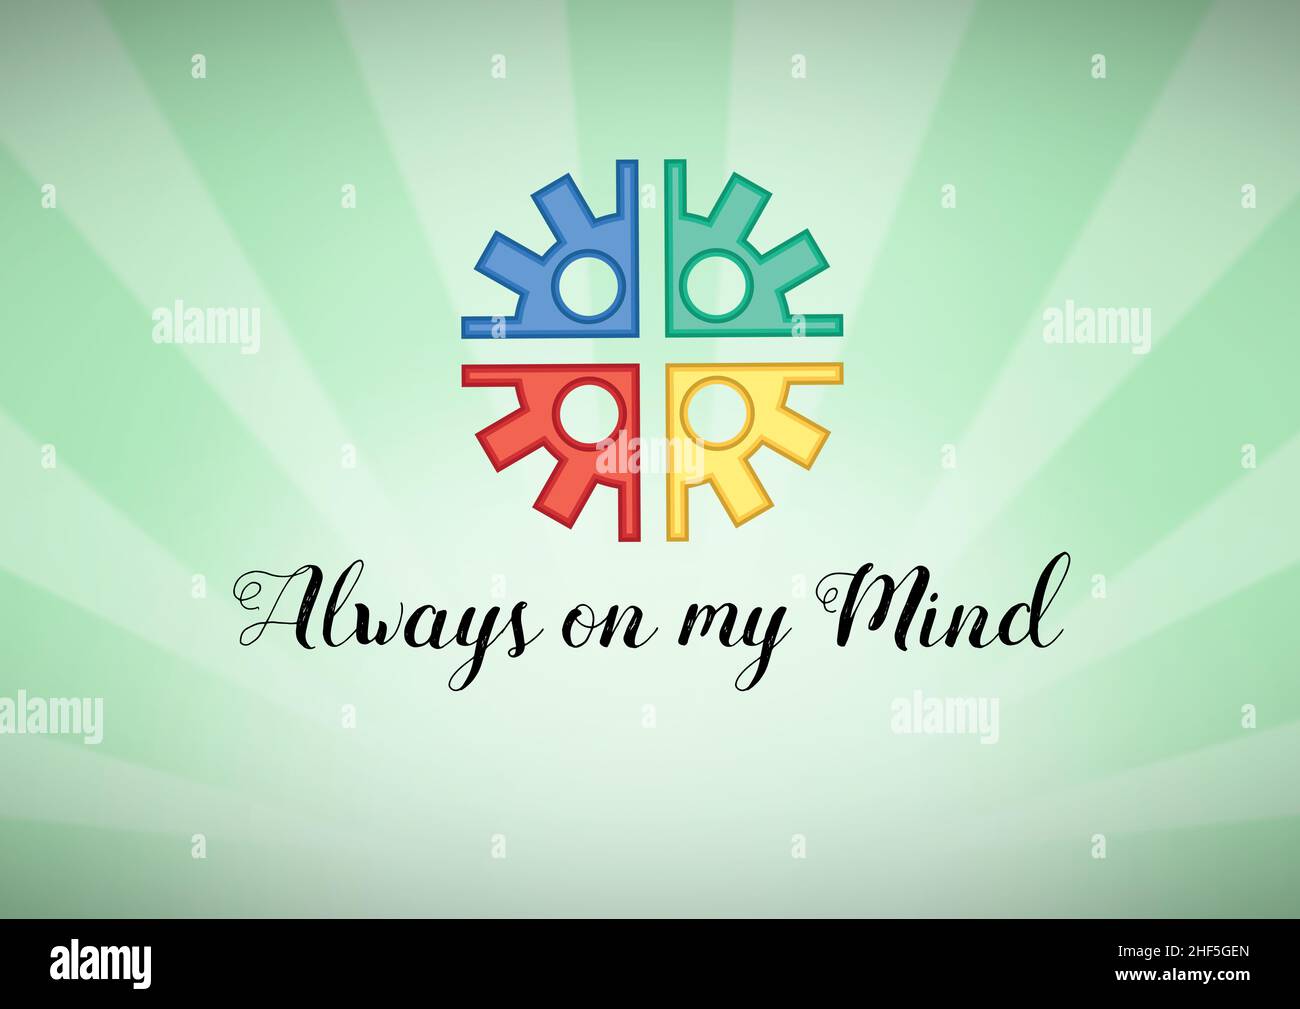 You are always in my mind card black ink grunge Vector Image